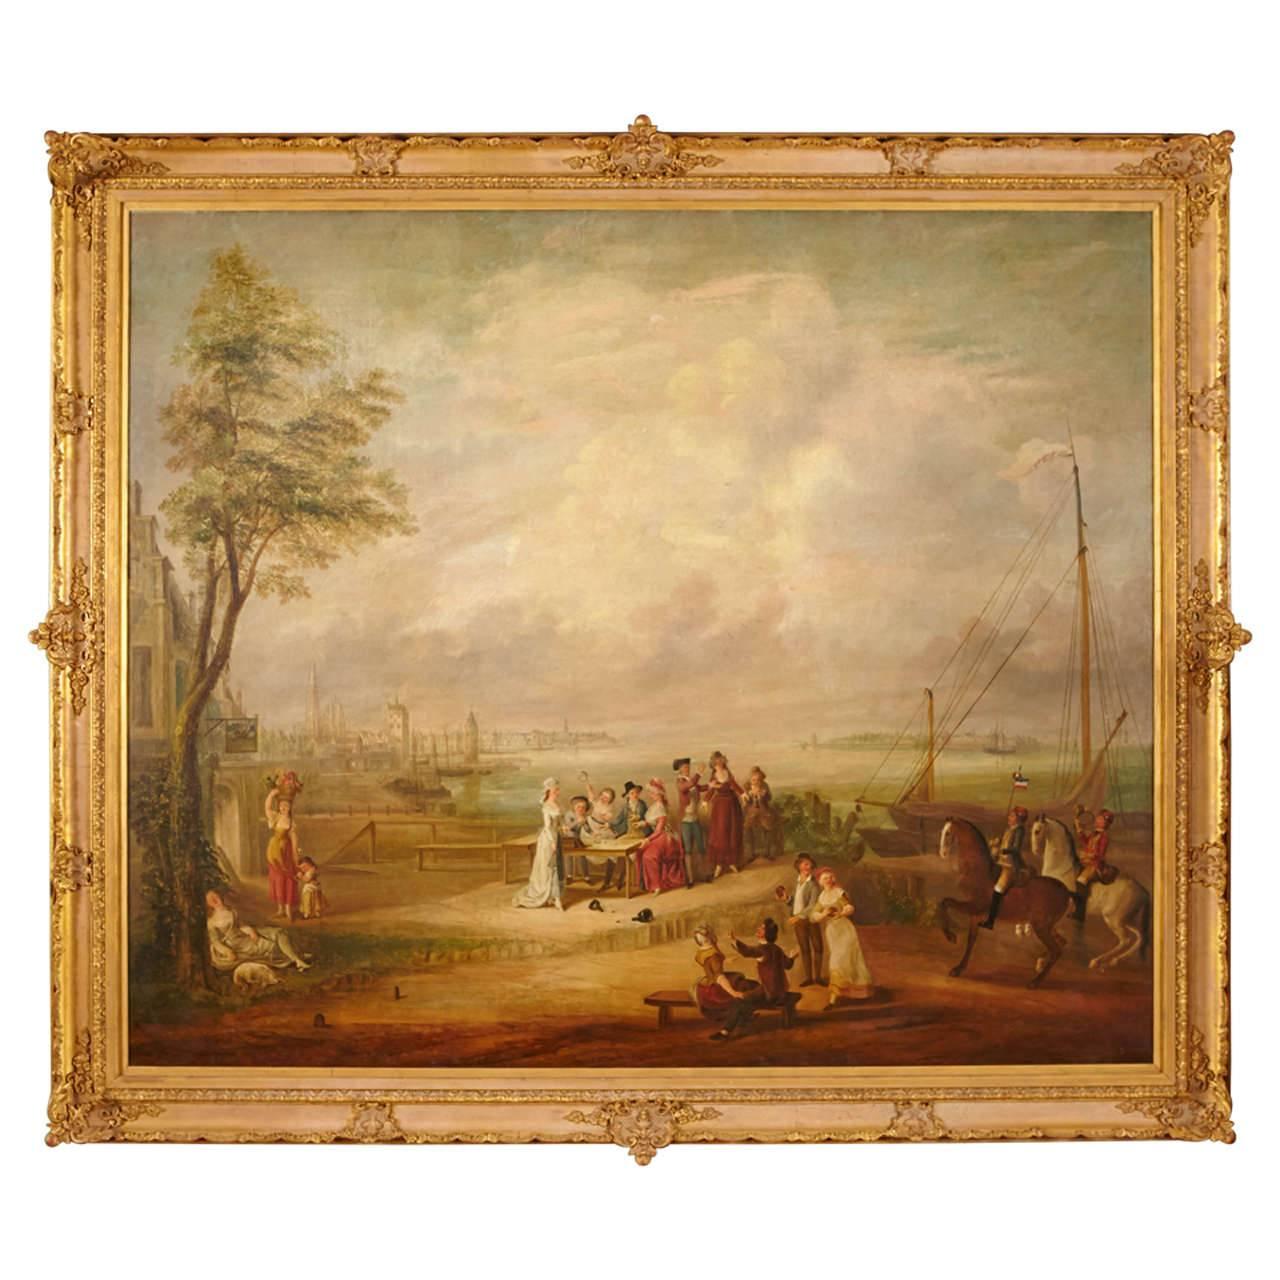 Unknown Figurative Painting - Monumental 18th Century French Oil on Canvas Painting in Ornate Gilt Frame